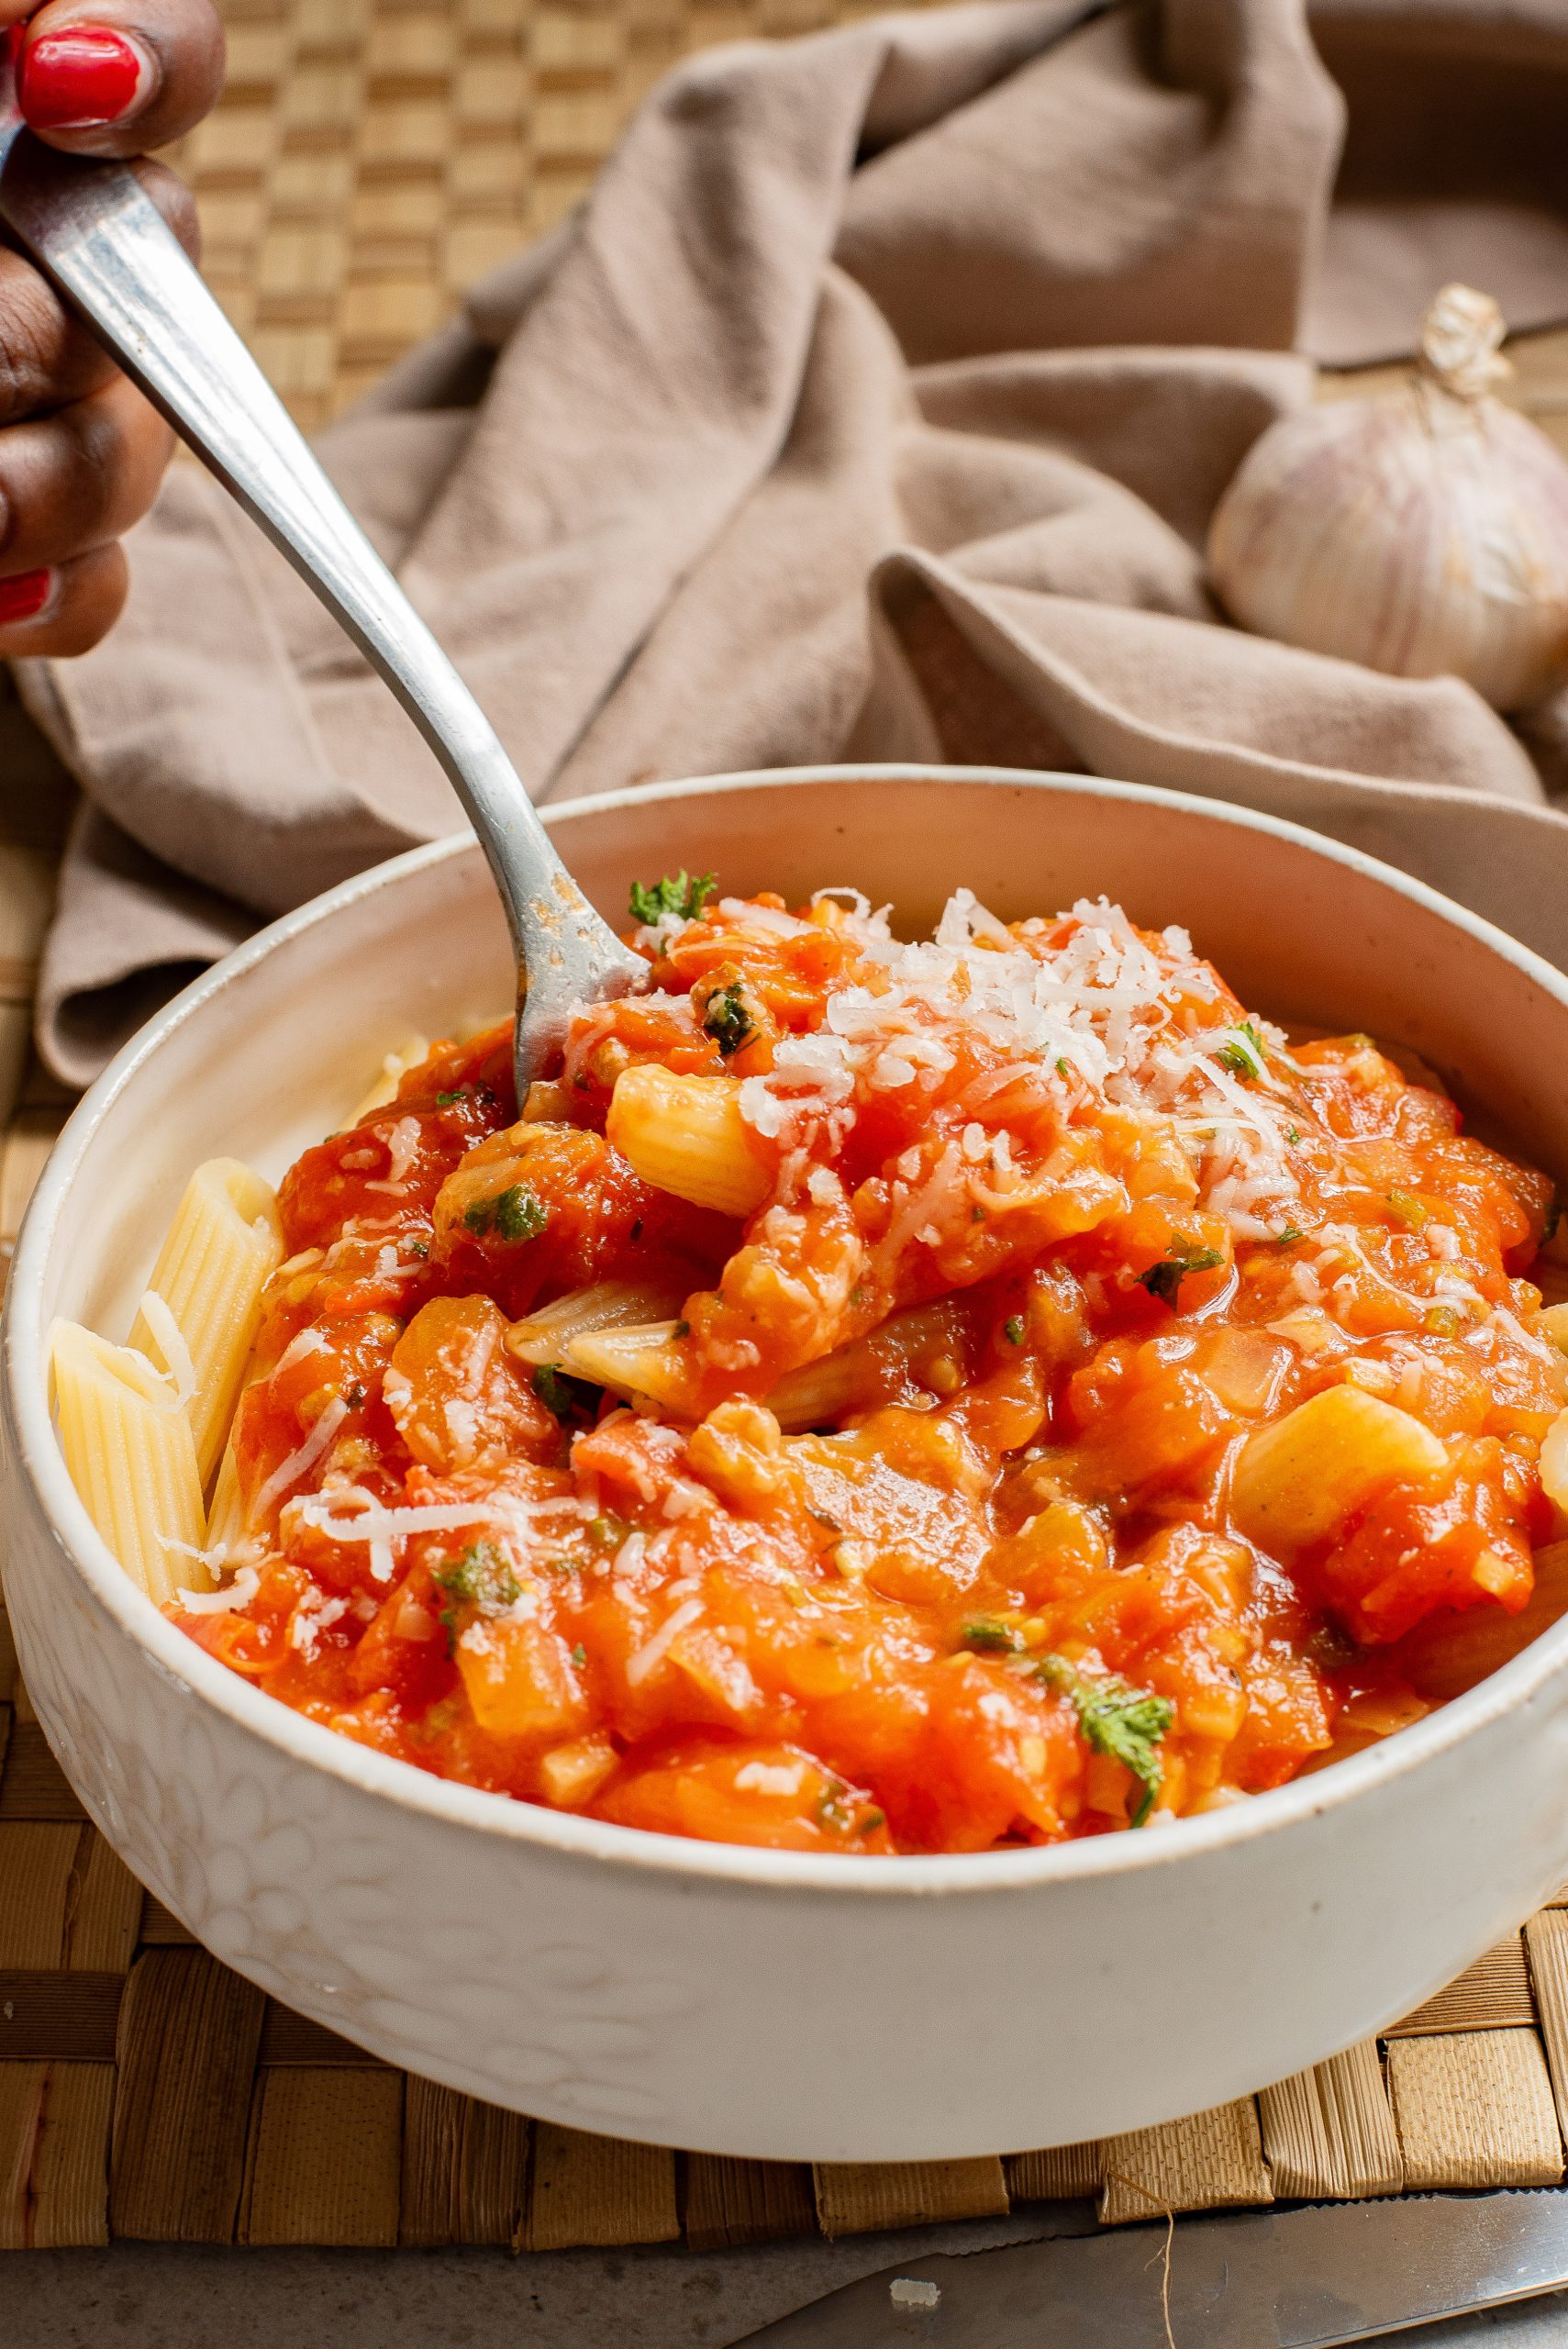 Bowl of penne pasta with tomato sauce and grated cheese, garnished with herbs, with a fork.